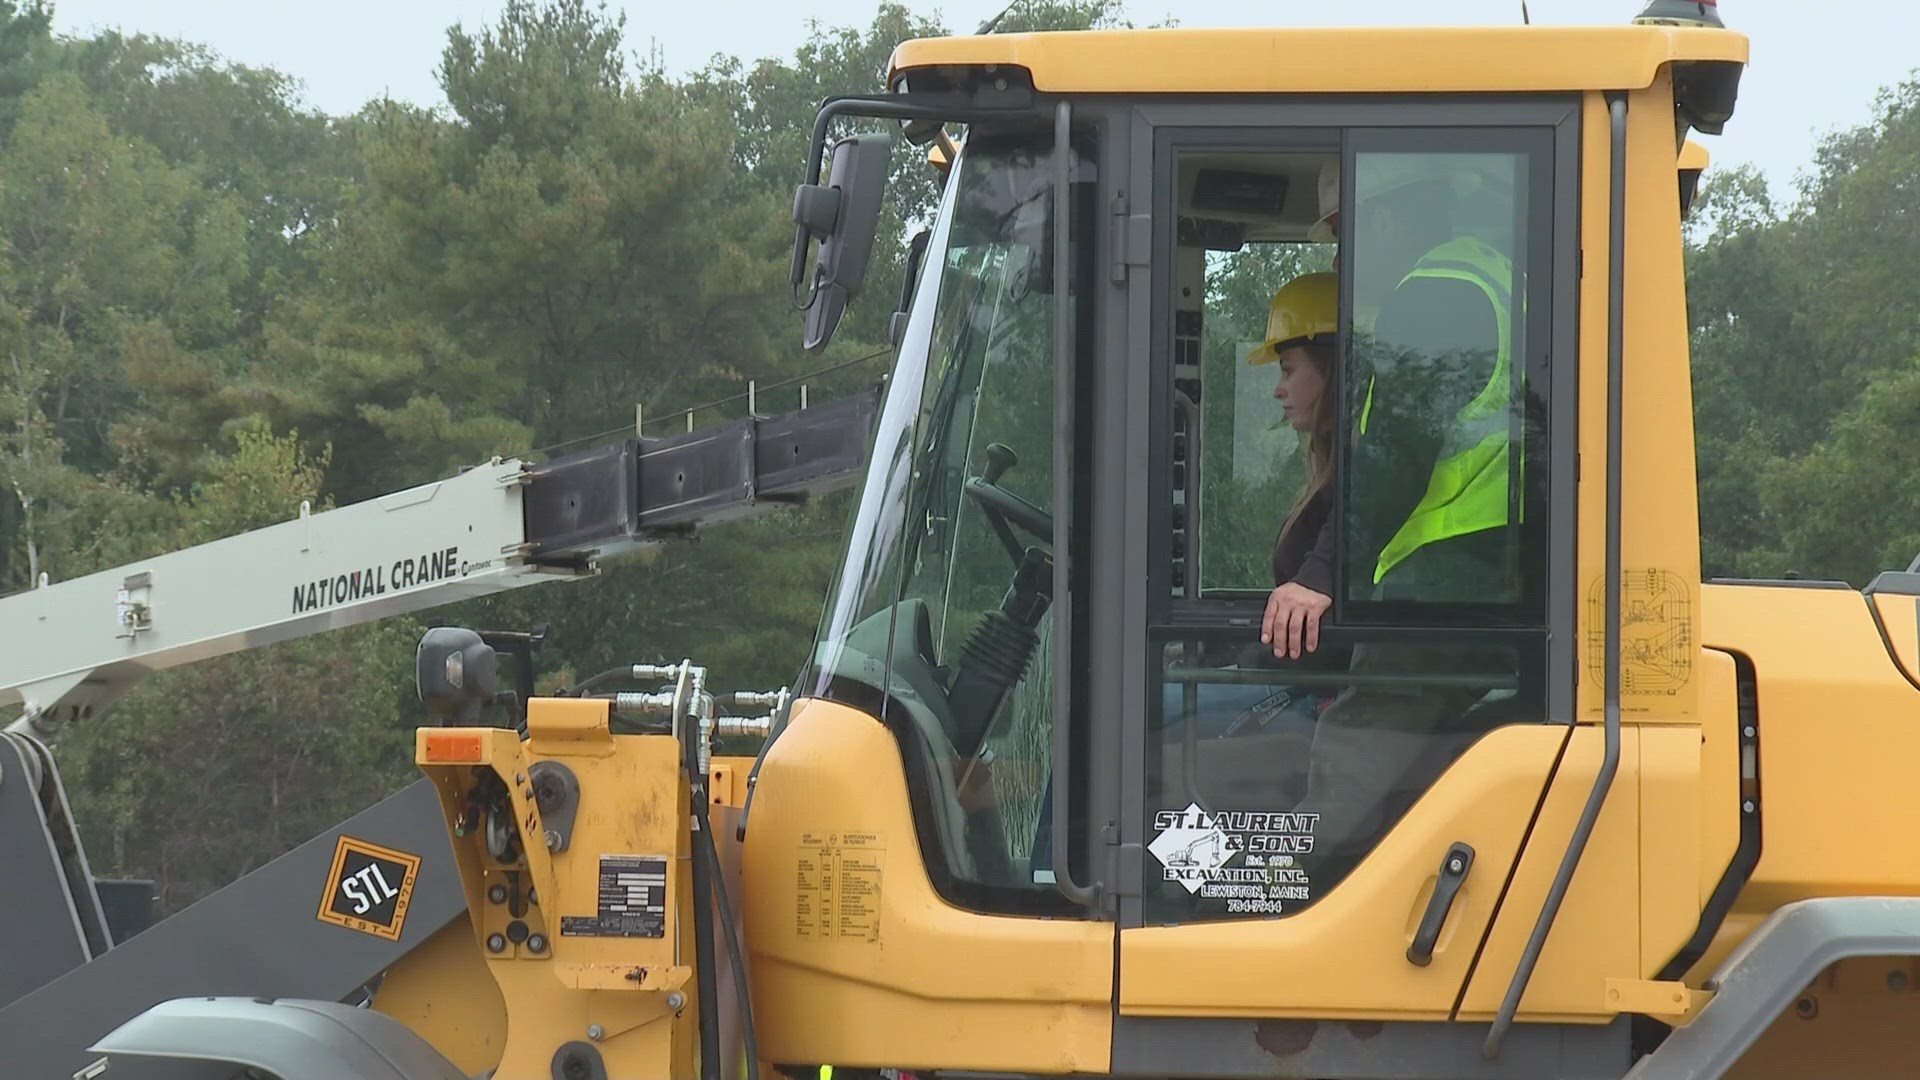 Only 11 percent of the country's construction workforce is women, according to U.S. Bureau of Labor Statistics. But a program in Maine is hoping to change that.